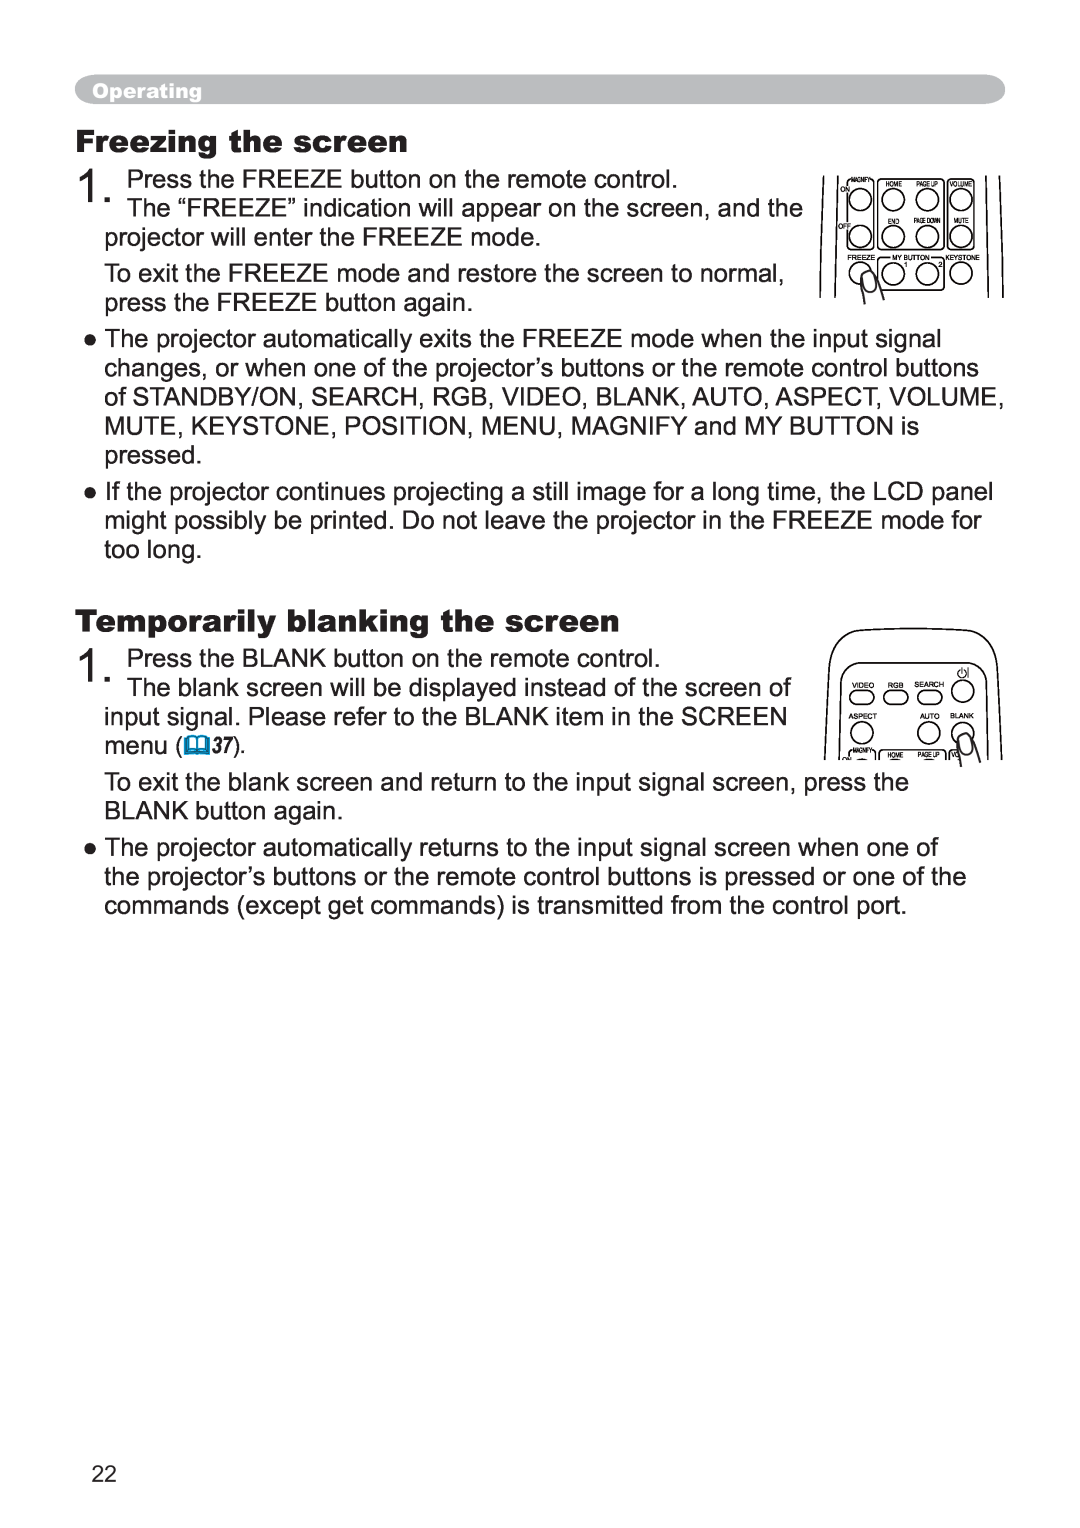 Hitachi CP-X251 user manual Freezing the screen, Temporarily blanking the screen 